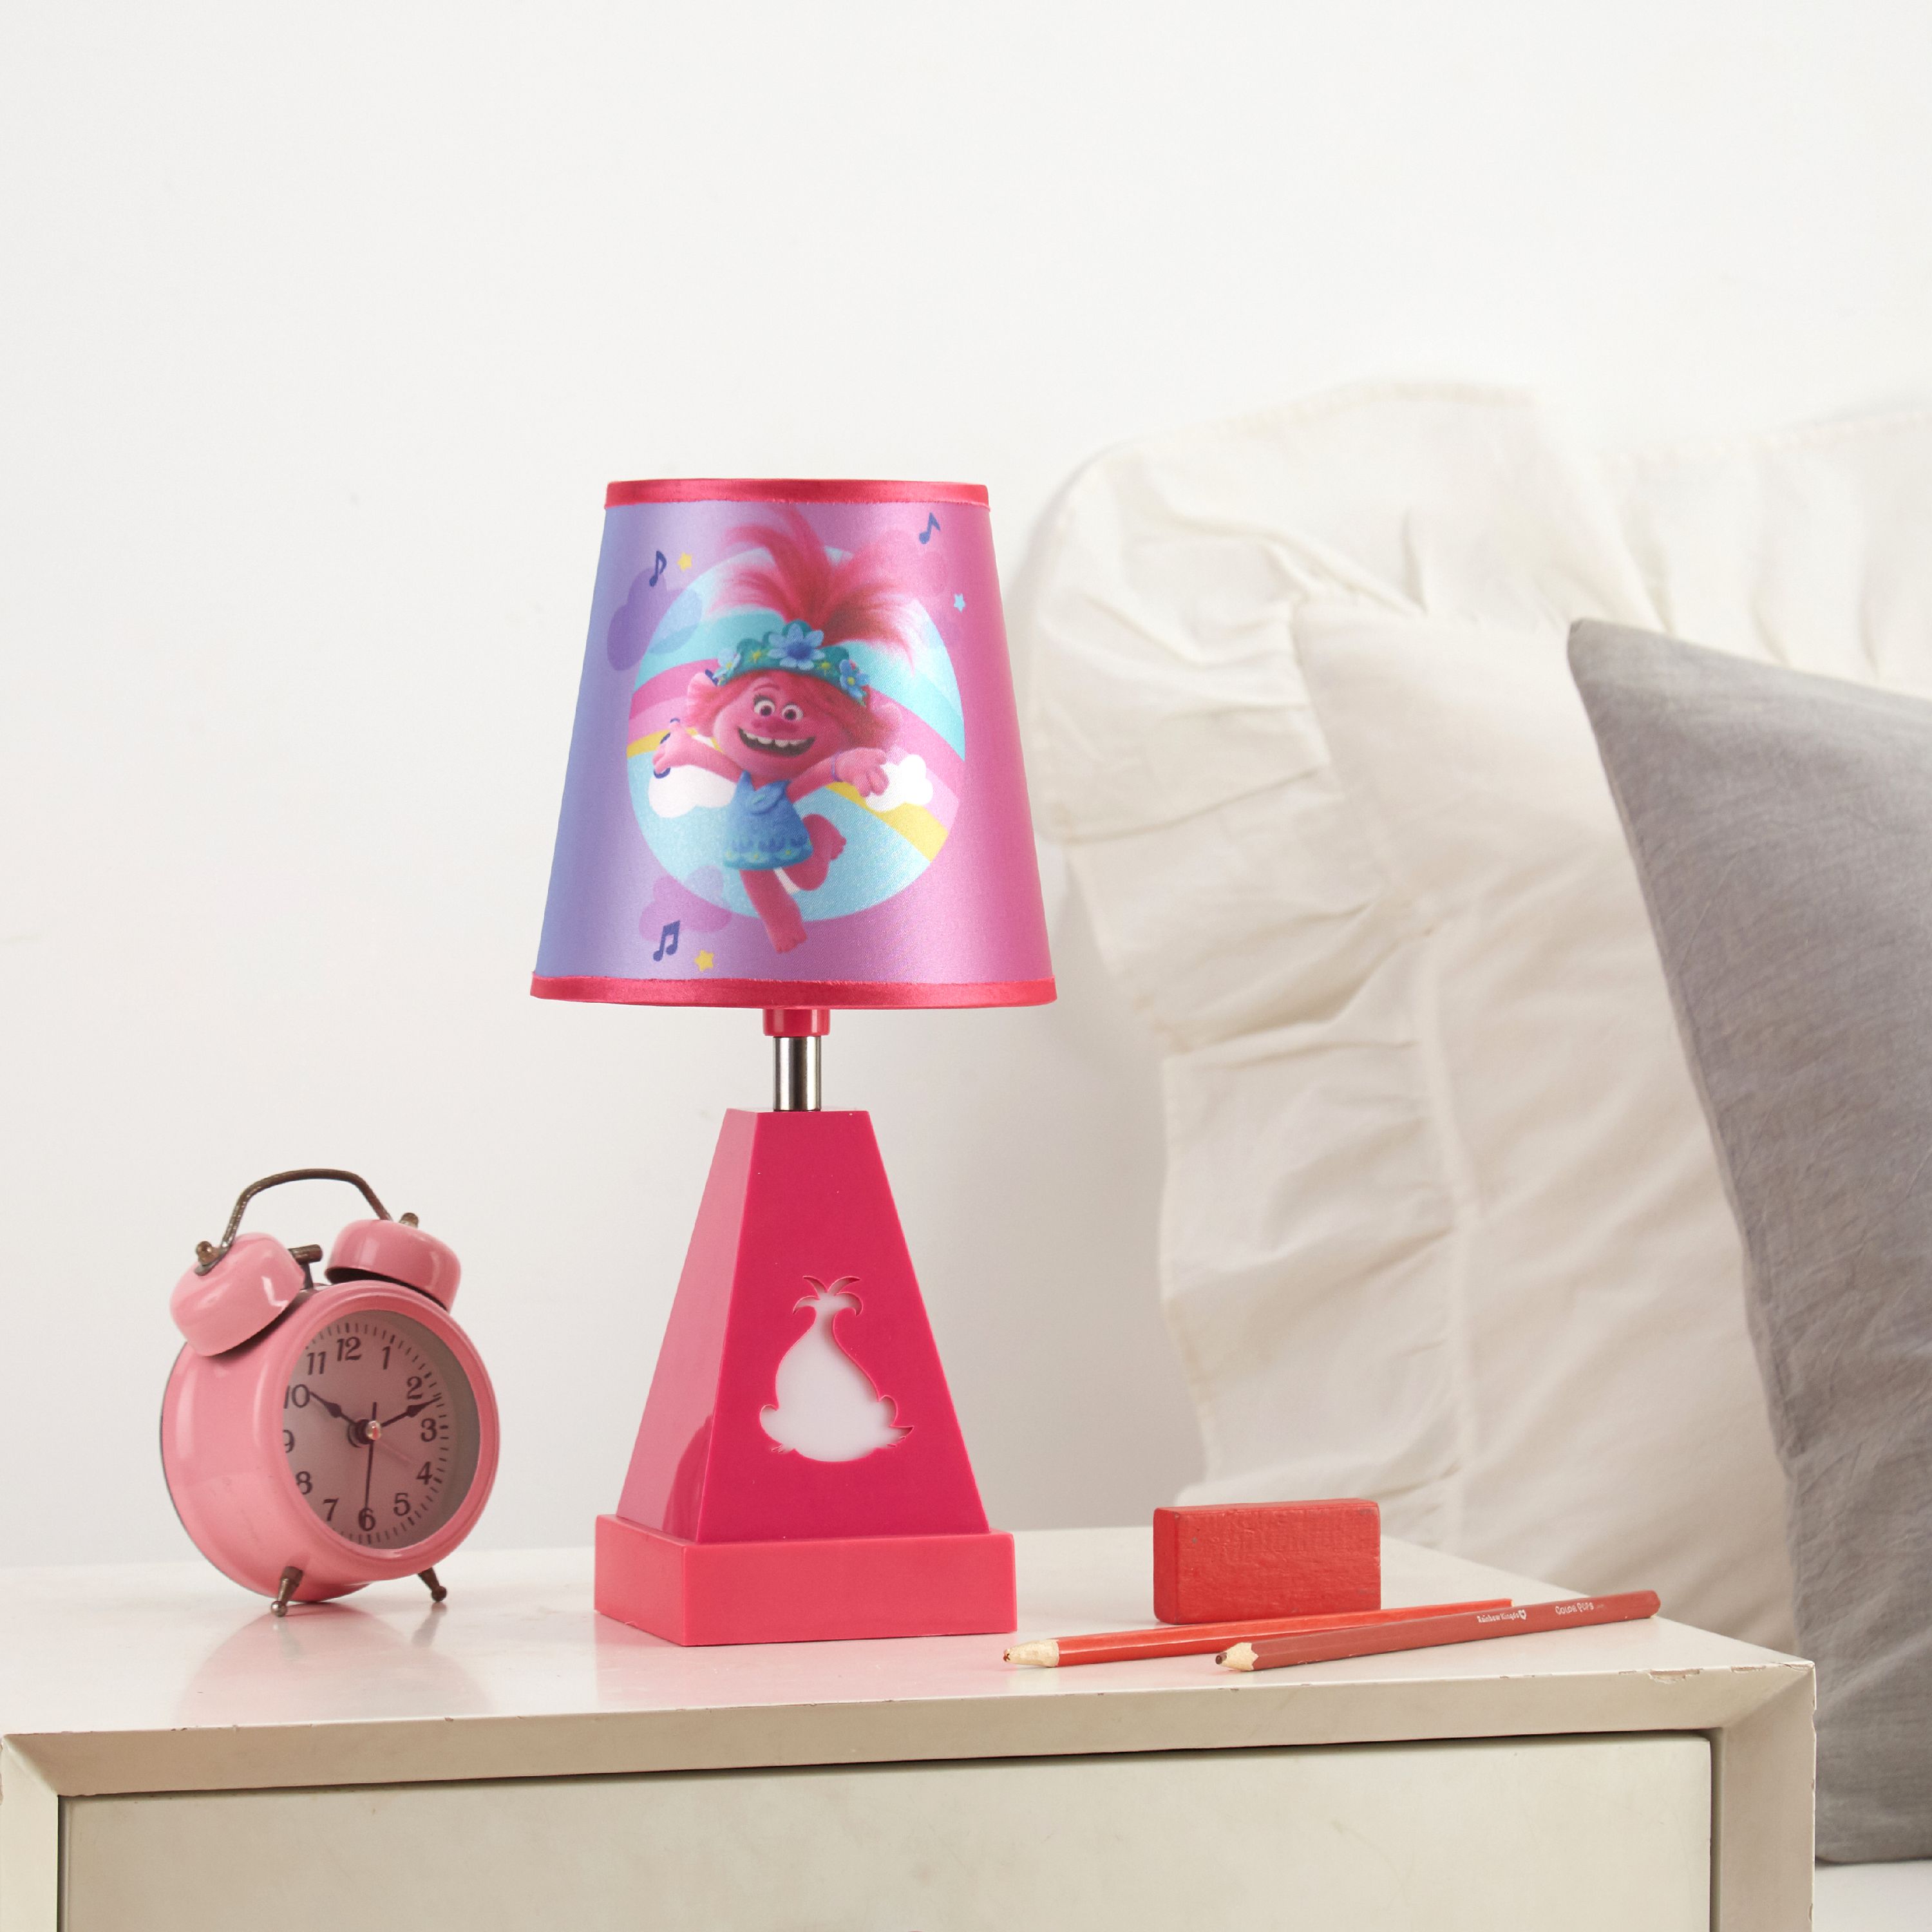 Dreamworks Trolls 2 in 1 Kids Lamp with Night Light - image 5 of 6